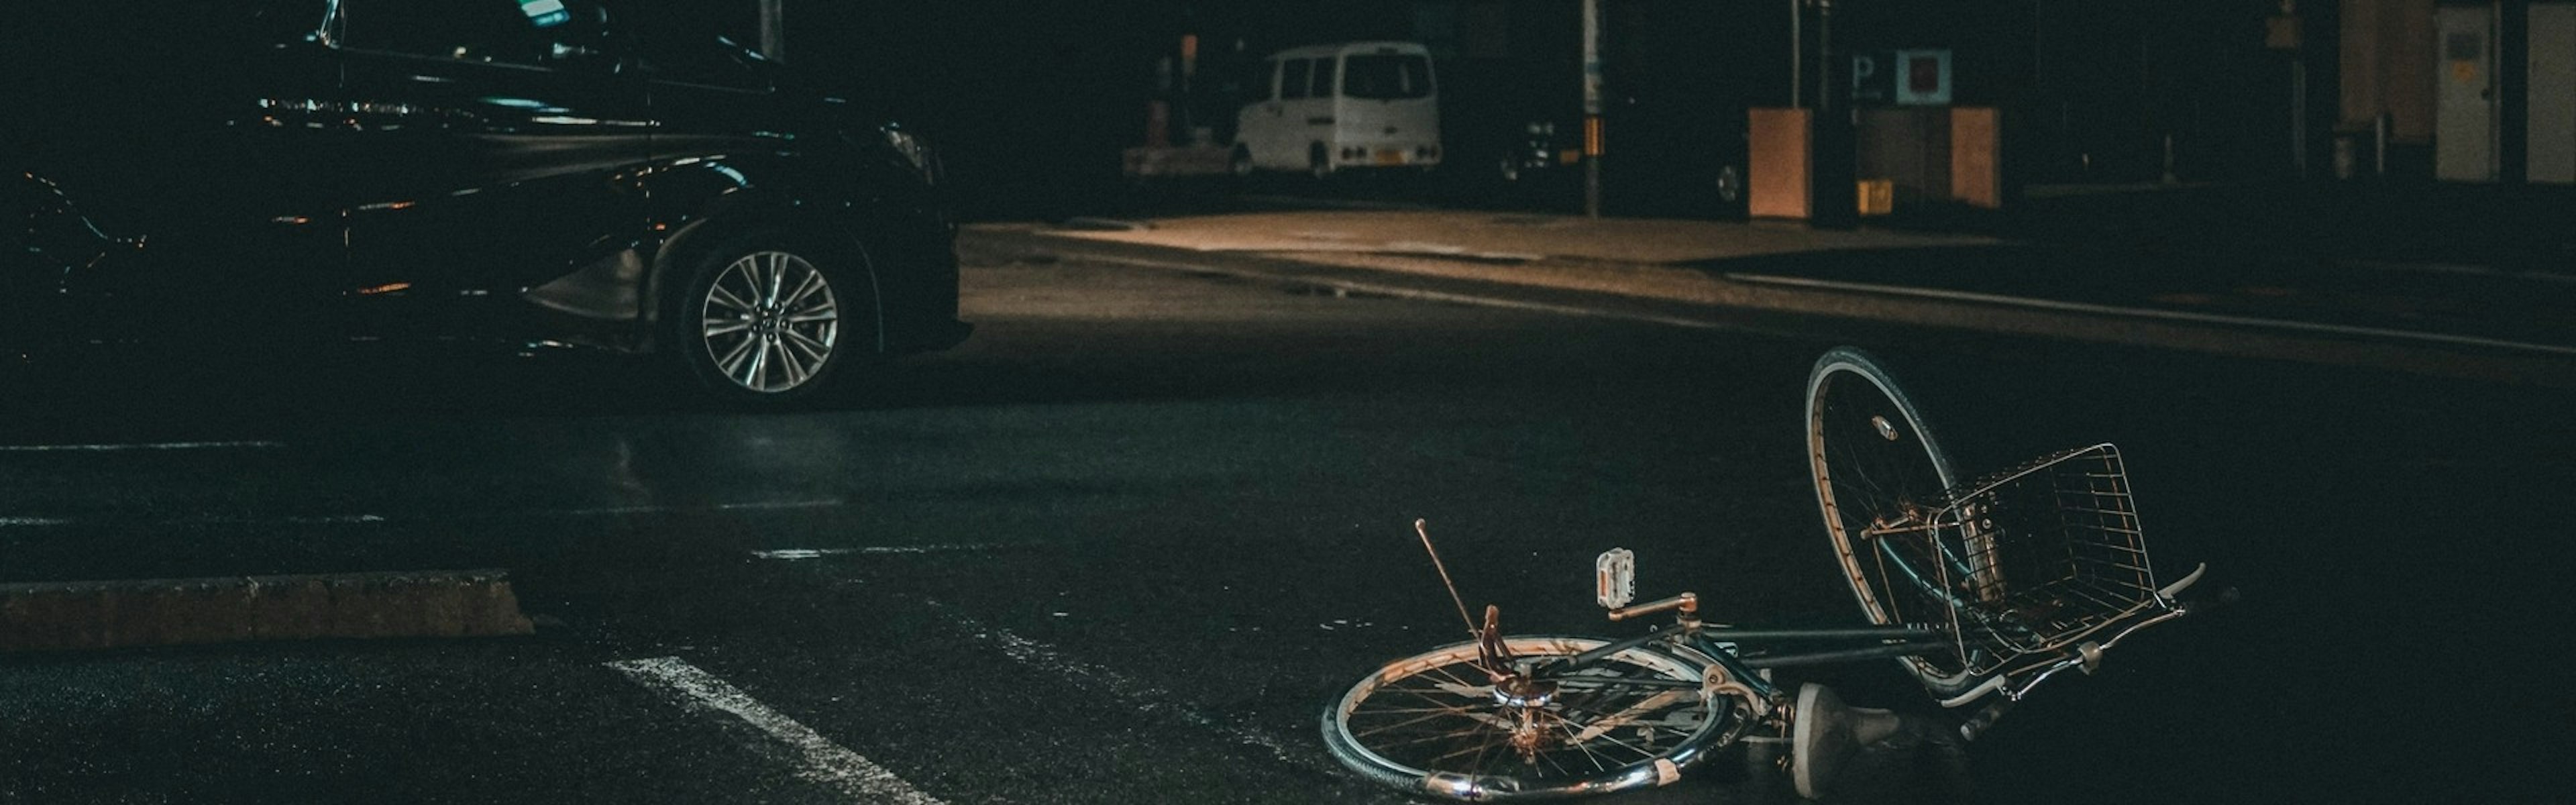 Cover Image for 9 Things You Should Do If You Are In a Bicycle Accident